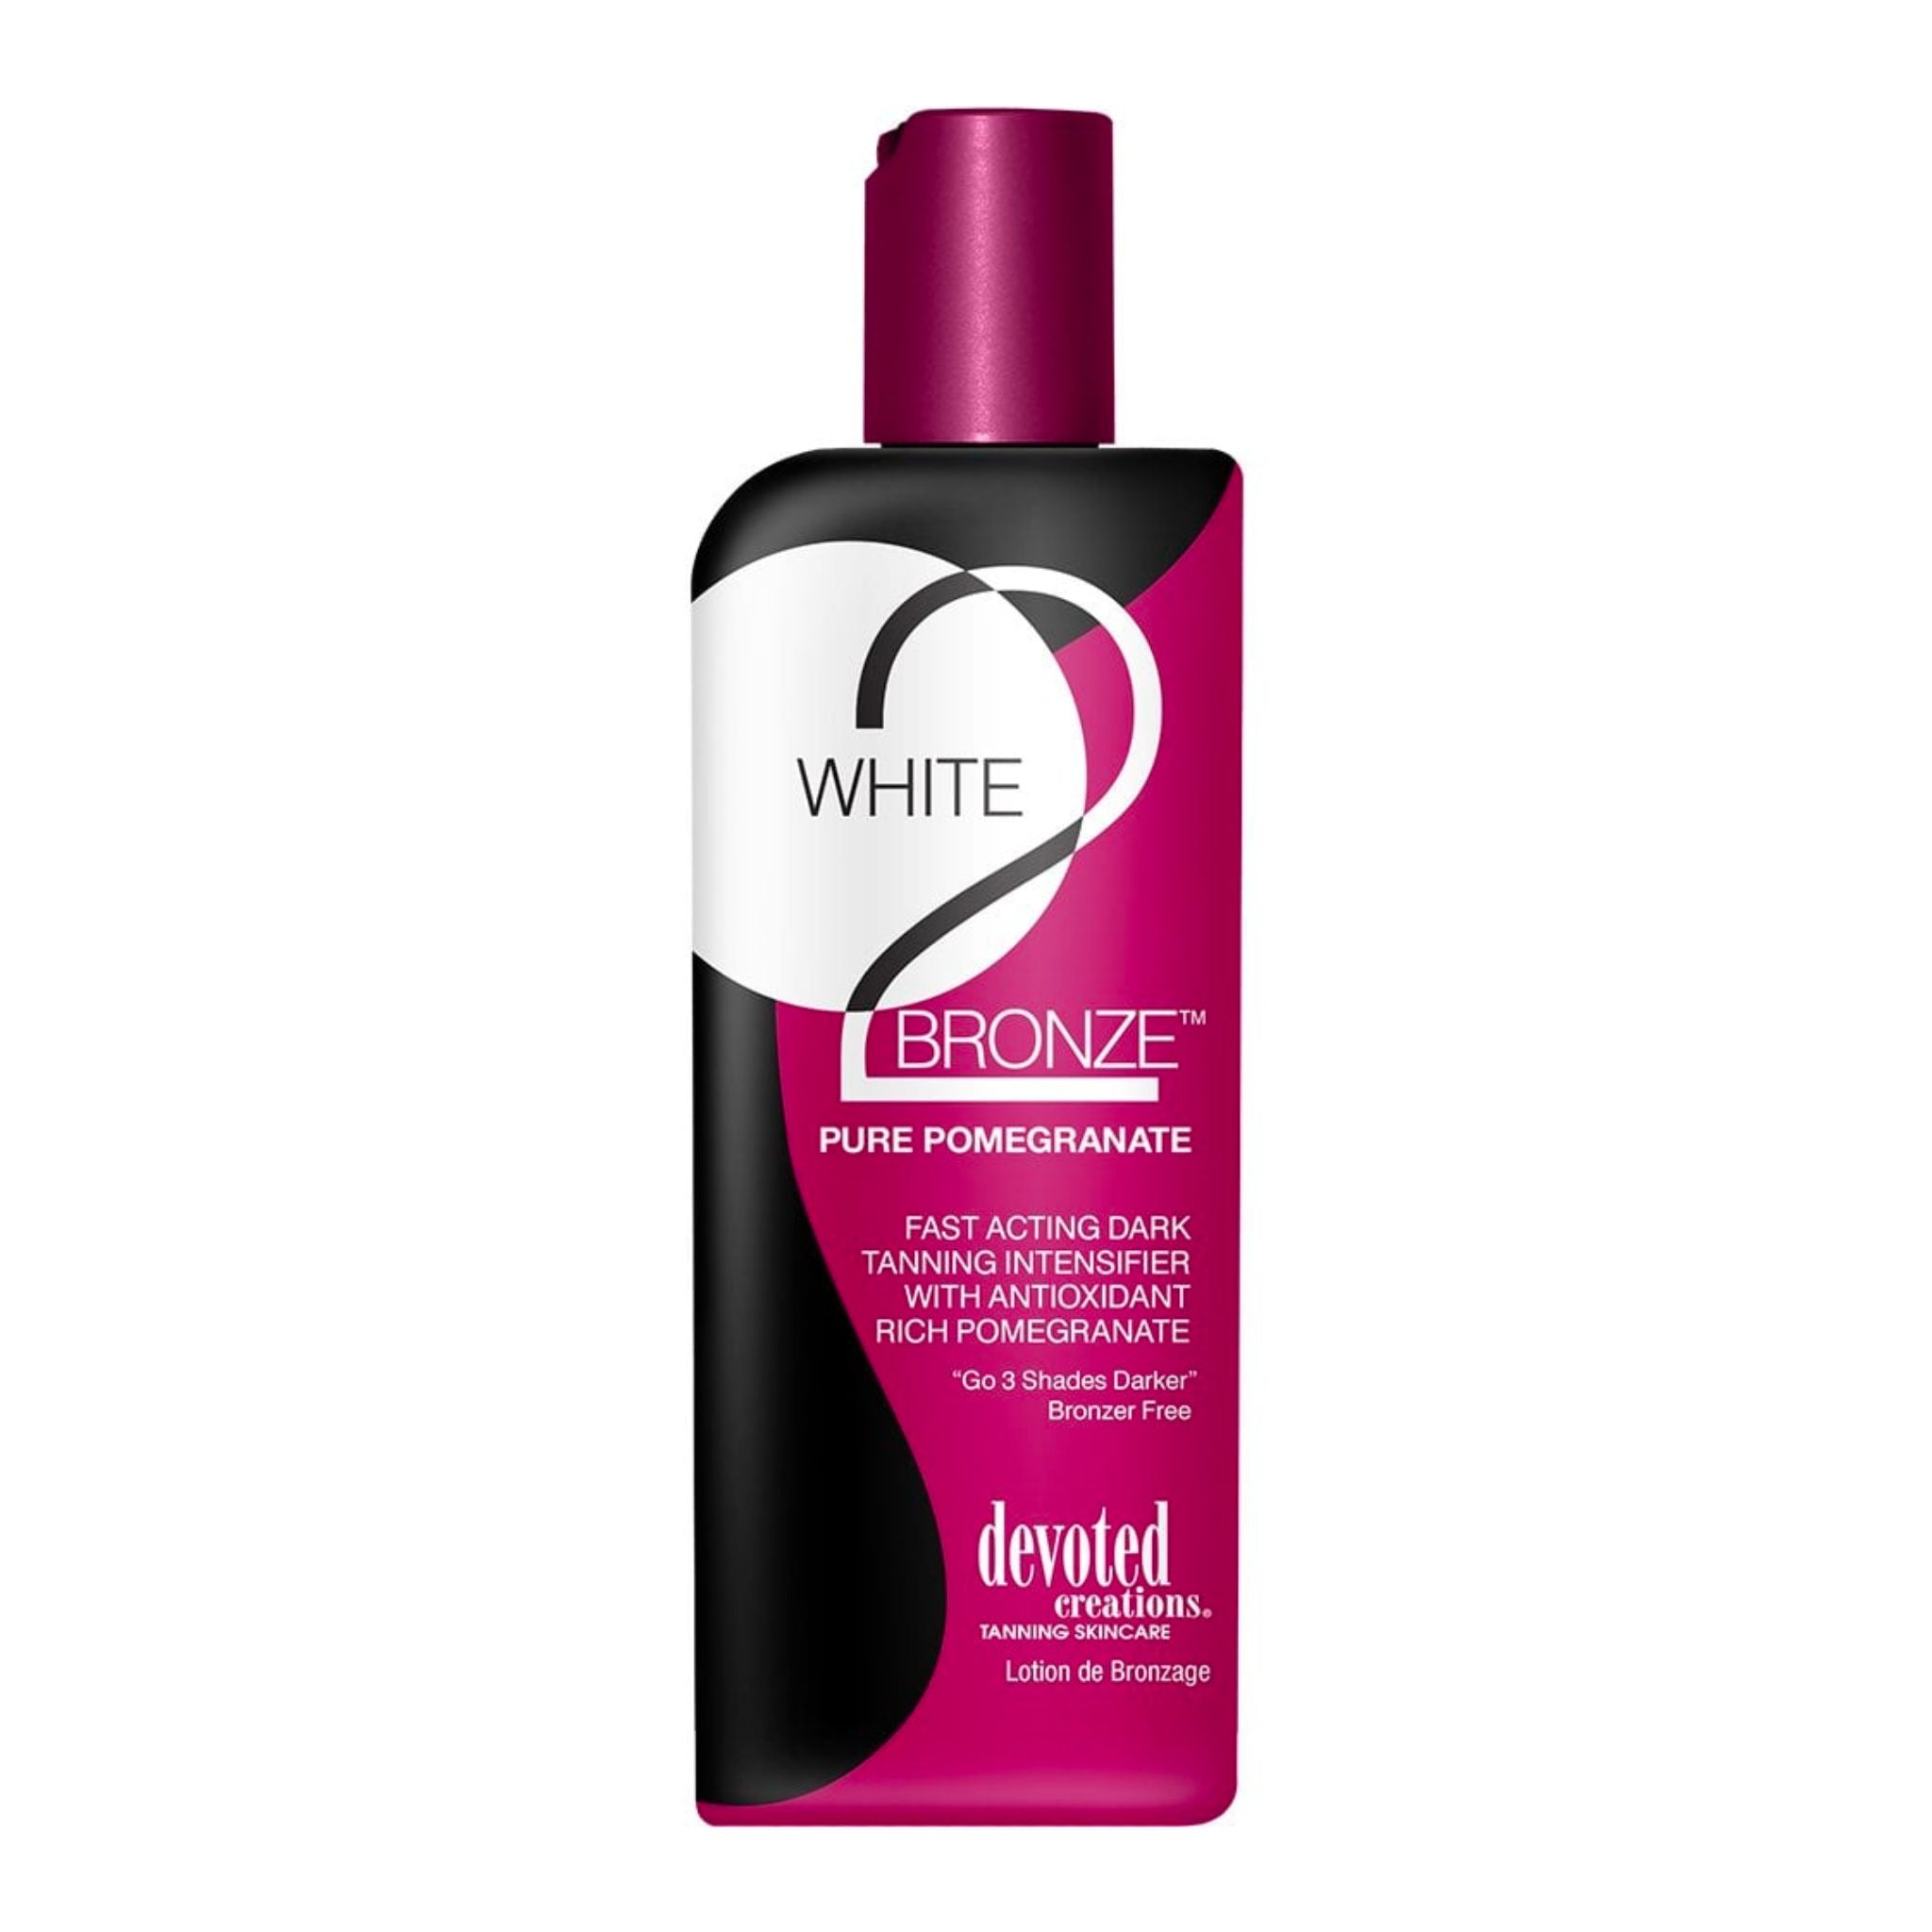 Devoted Creations White 2 Bronze Pomegranate Tanning Lotion Tanning Lotion